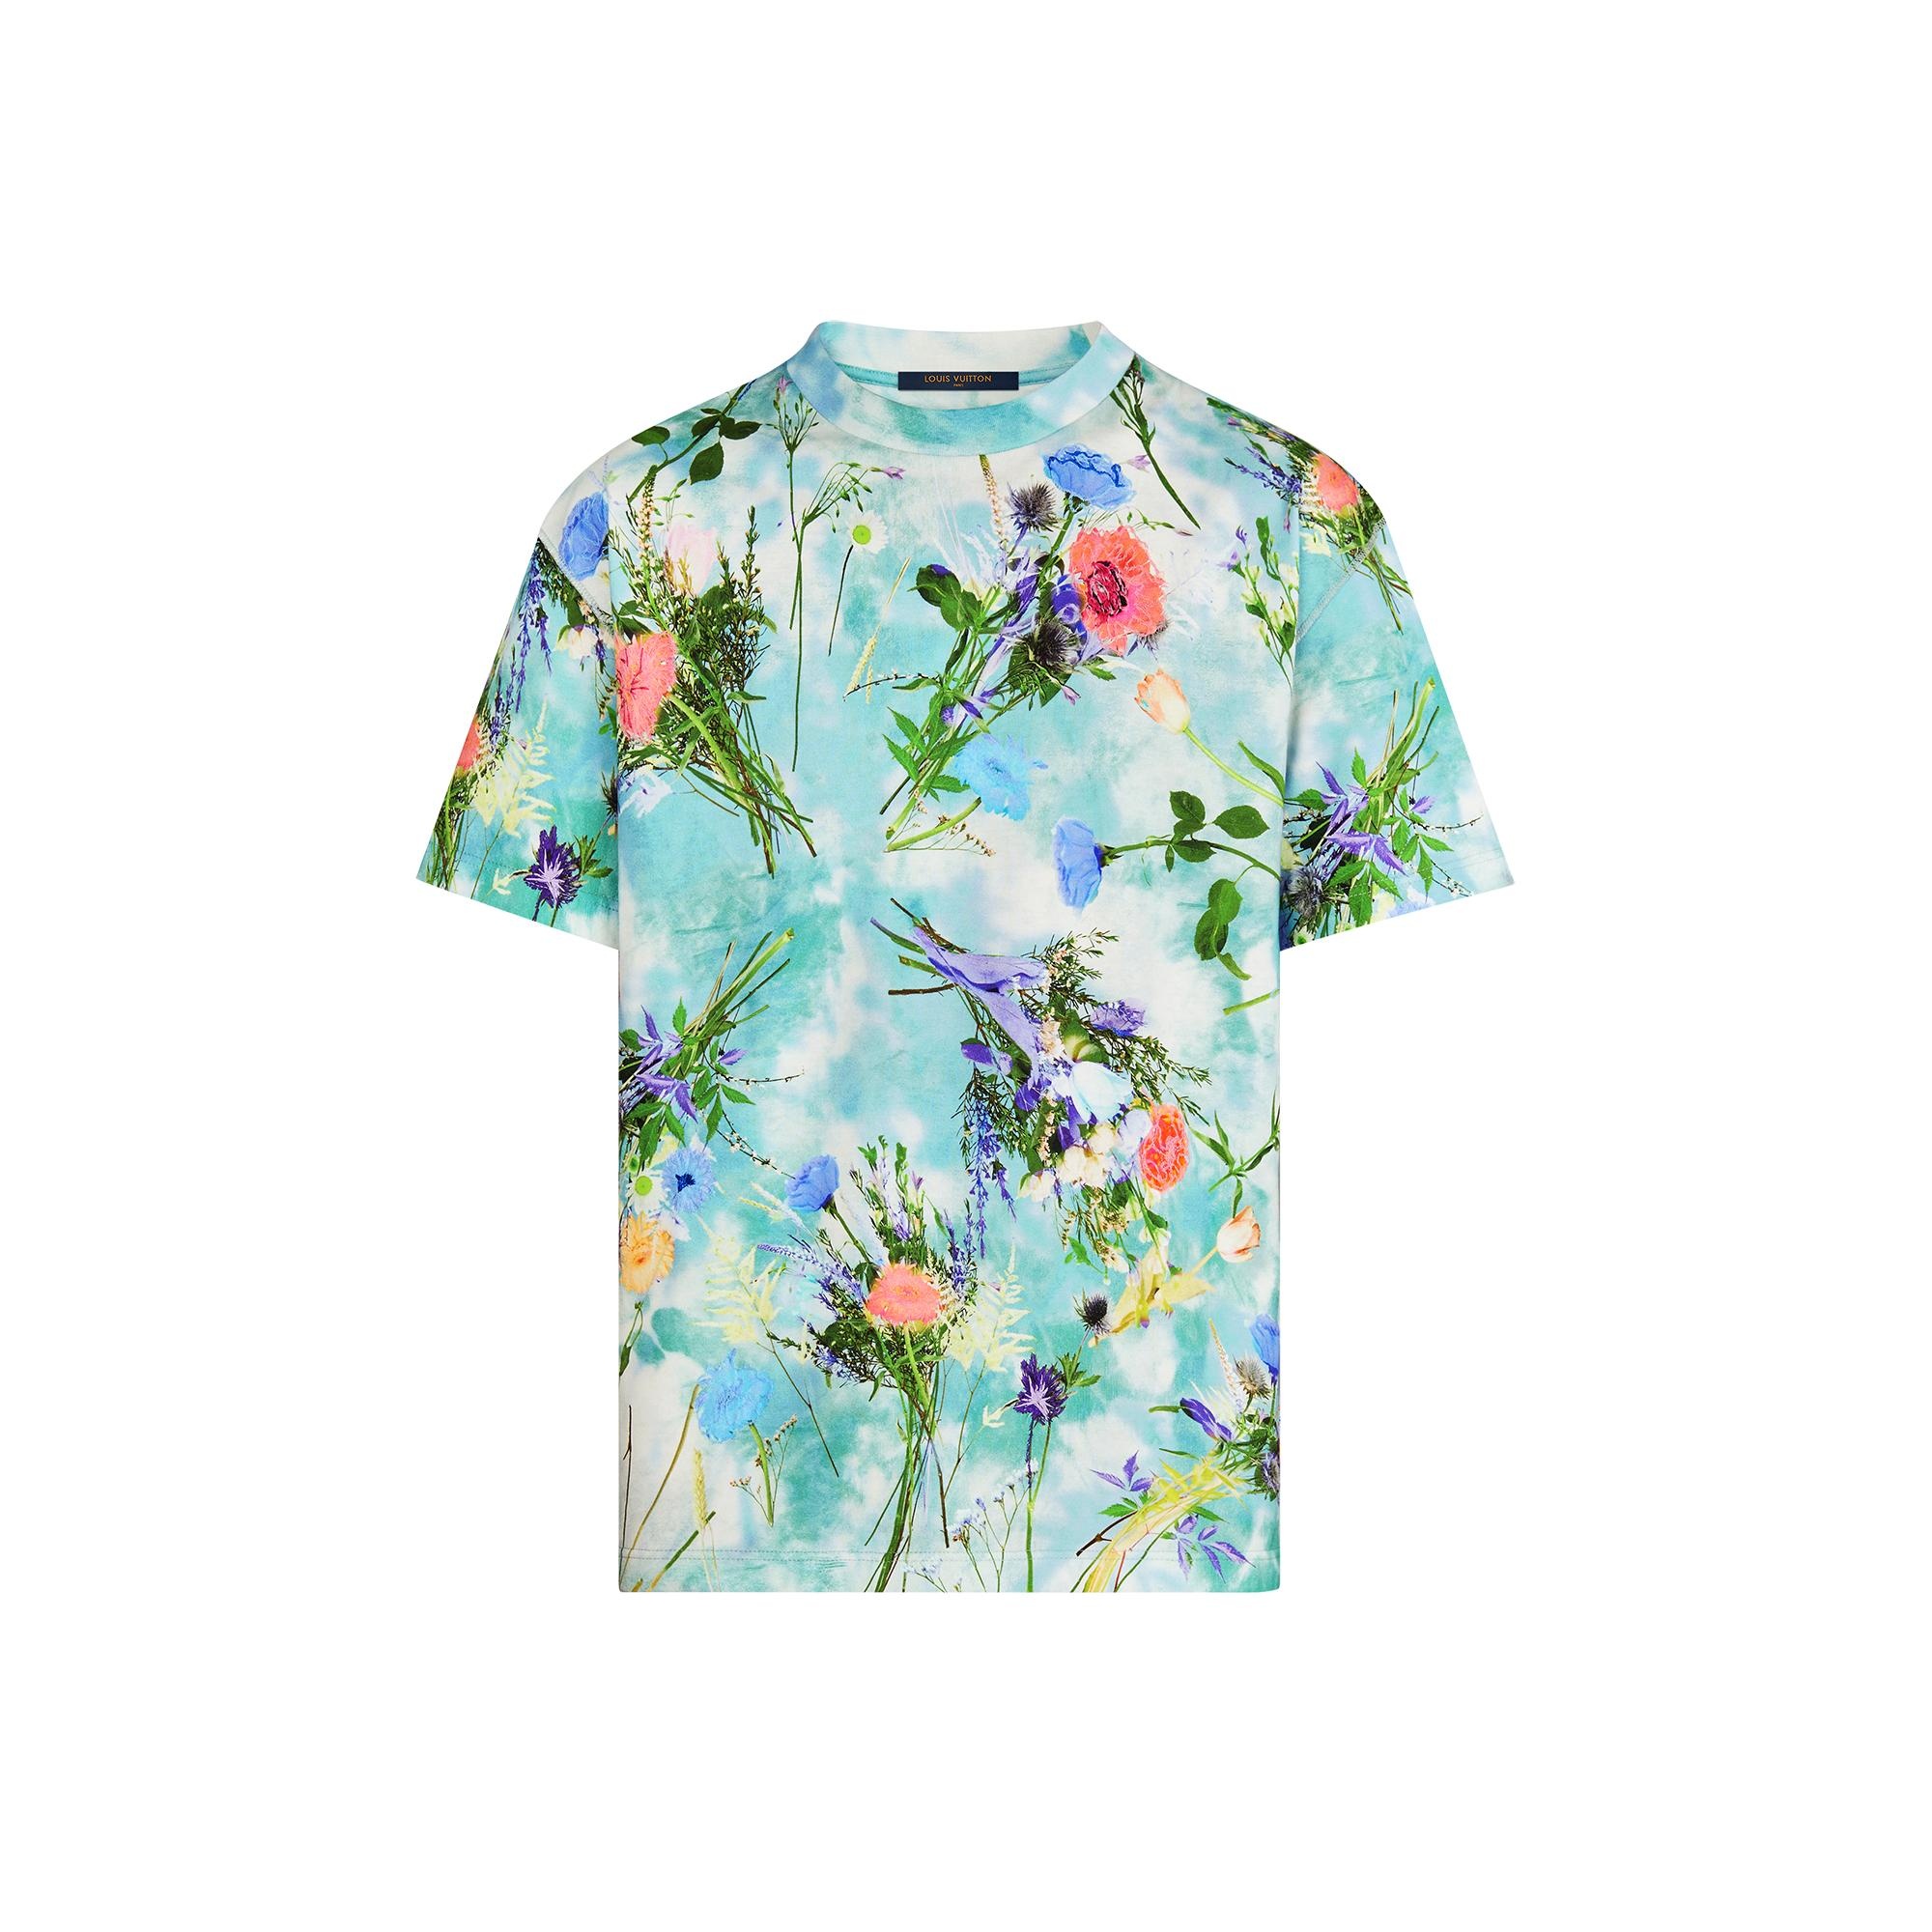 Printed and Embroidered Flower T-Shirt - 1